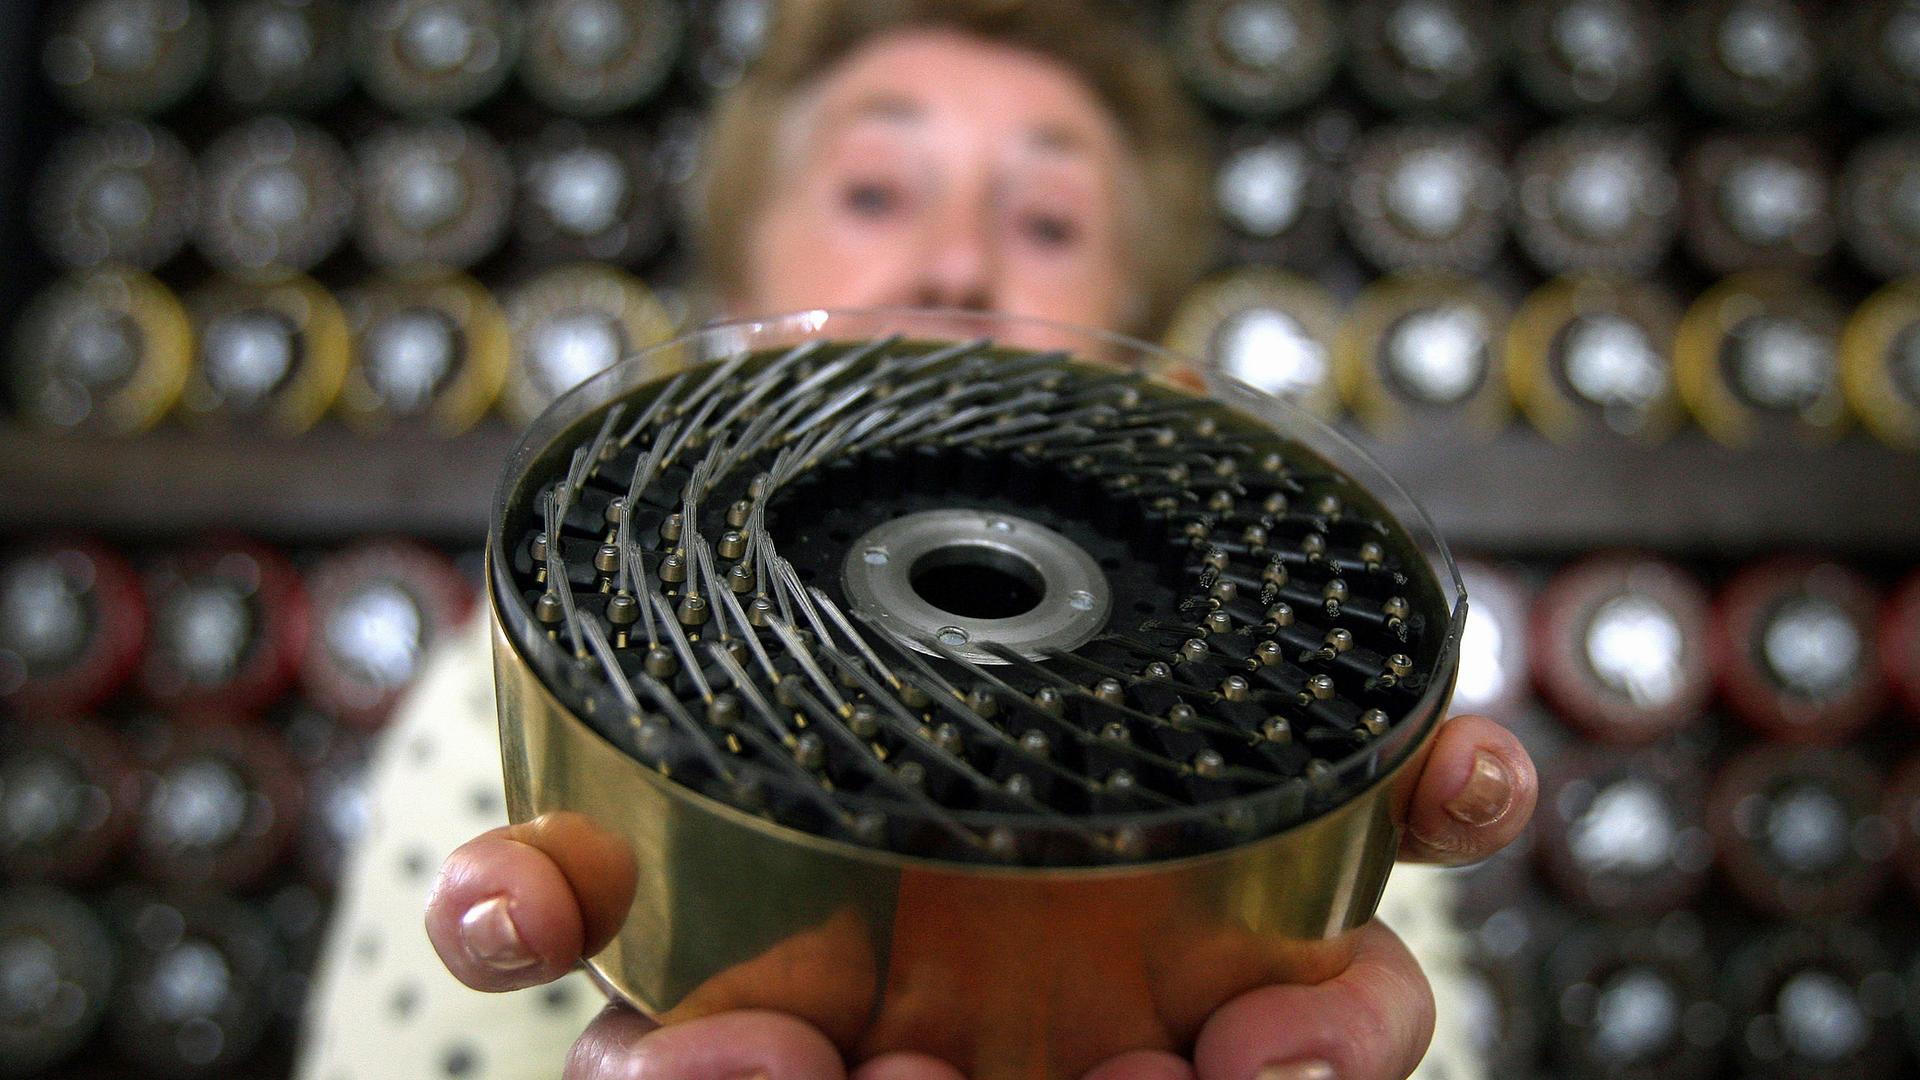 Former Bombe operator Jean Valentine shows a drum of British Turing Bombe machine in Bletchley Park Museum in Bletchley, central England, September 6, 2006. For the first time in sixty years Bletchley Park re-created the way the 'unbreakable' Enigma code 